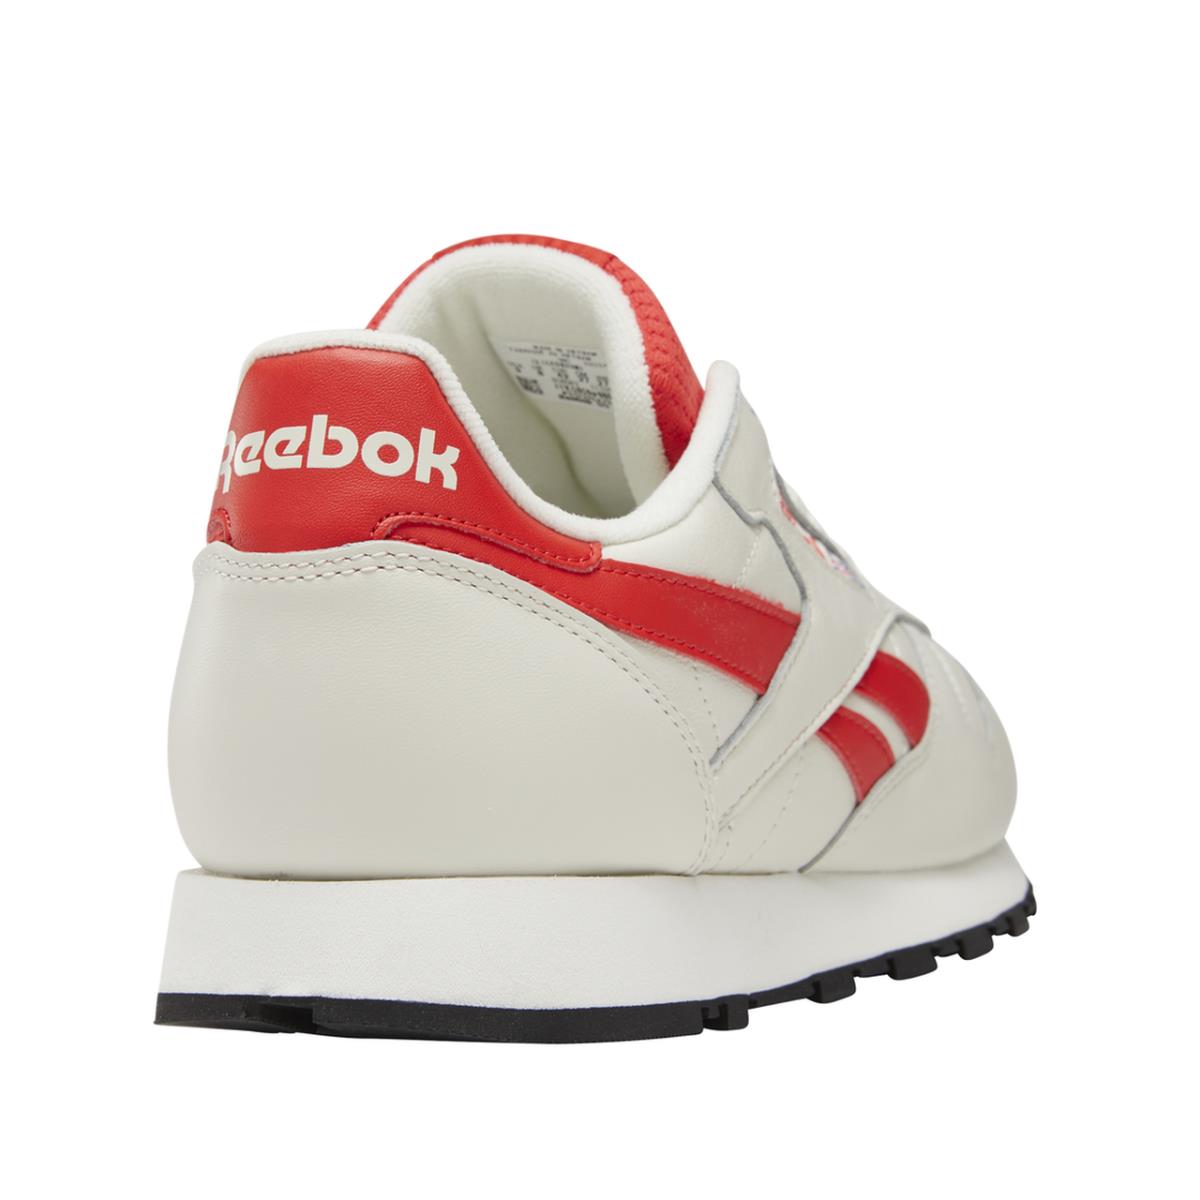 Reebok shoes Classic Leather - Chalk/Rad Red 2